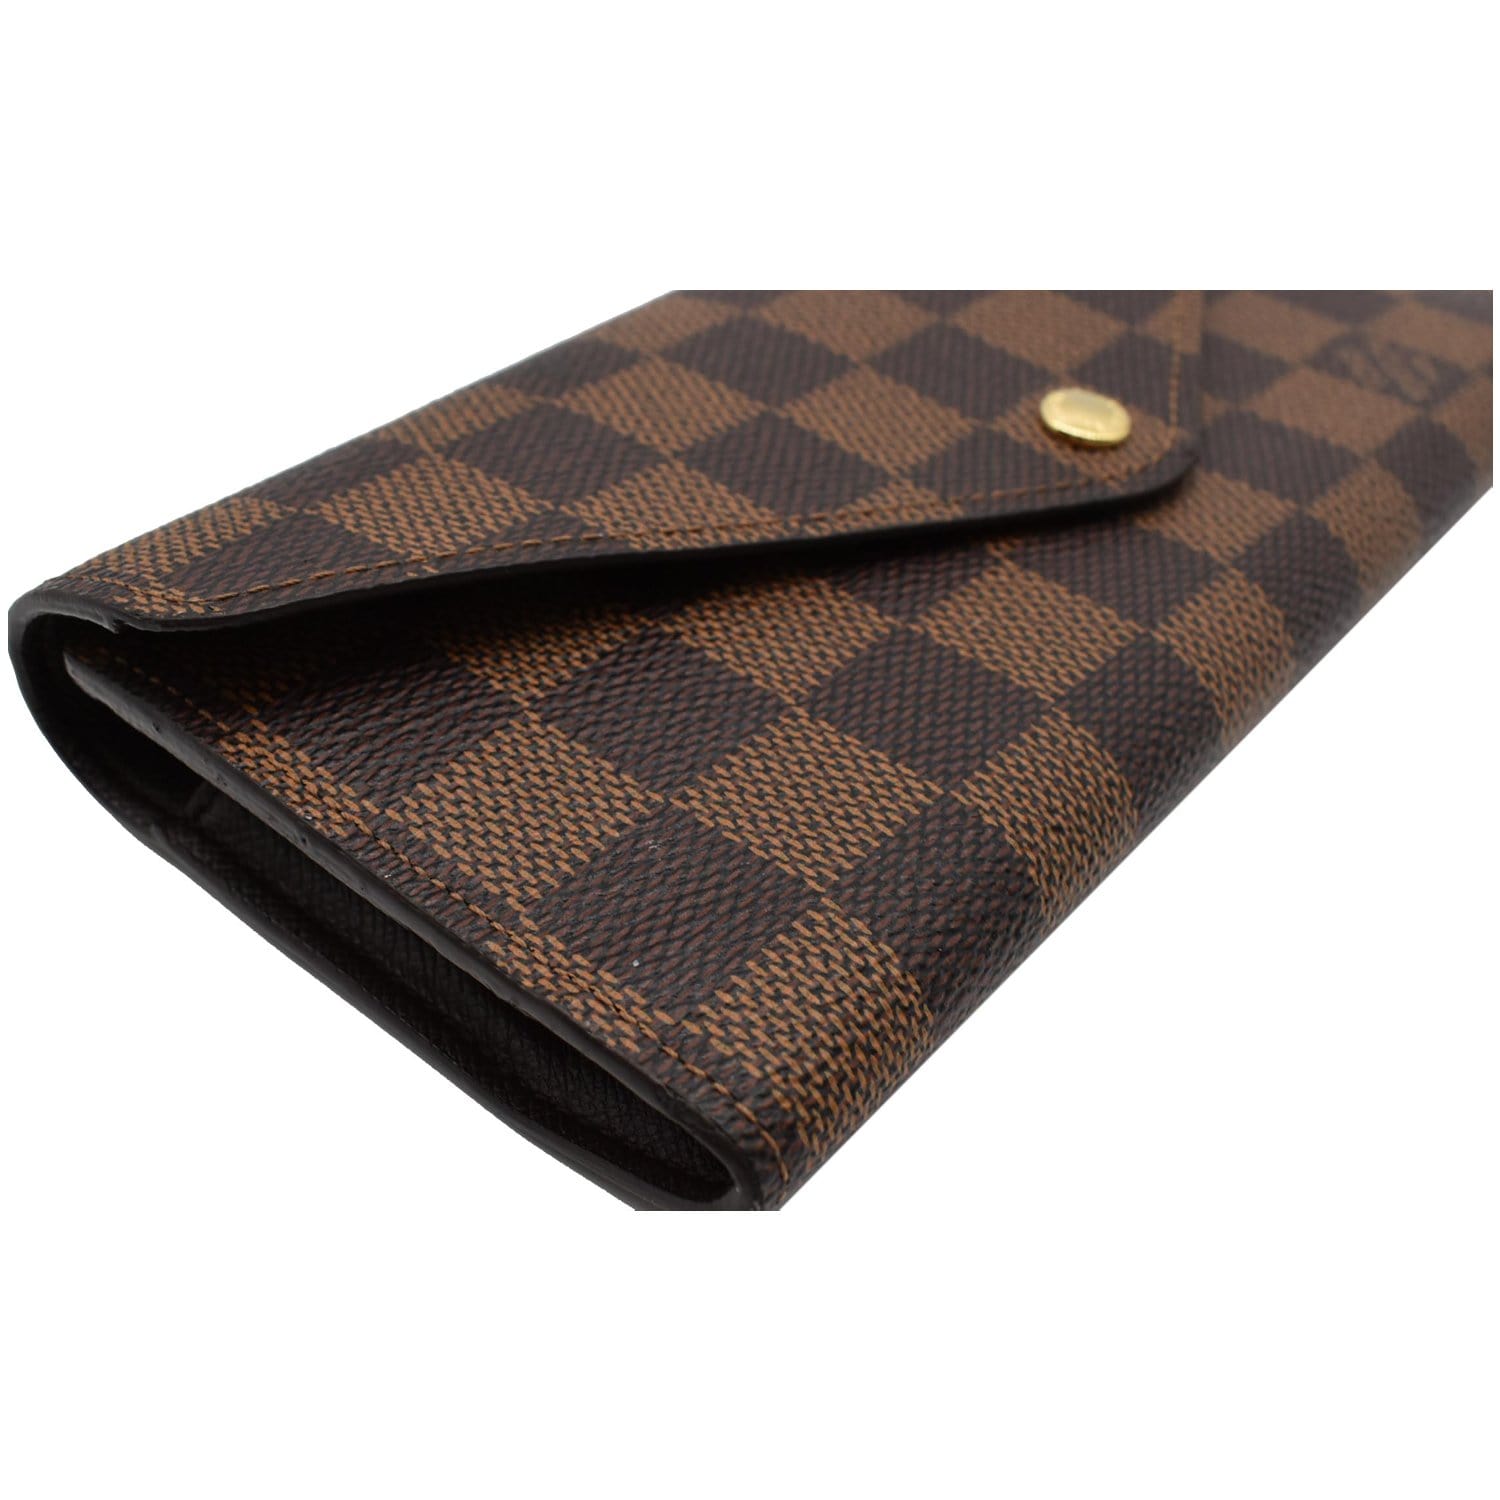 Louis Vuitton - Authenticated Joséphine Wallet - Leather Brown for Women, Very Good Condition